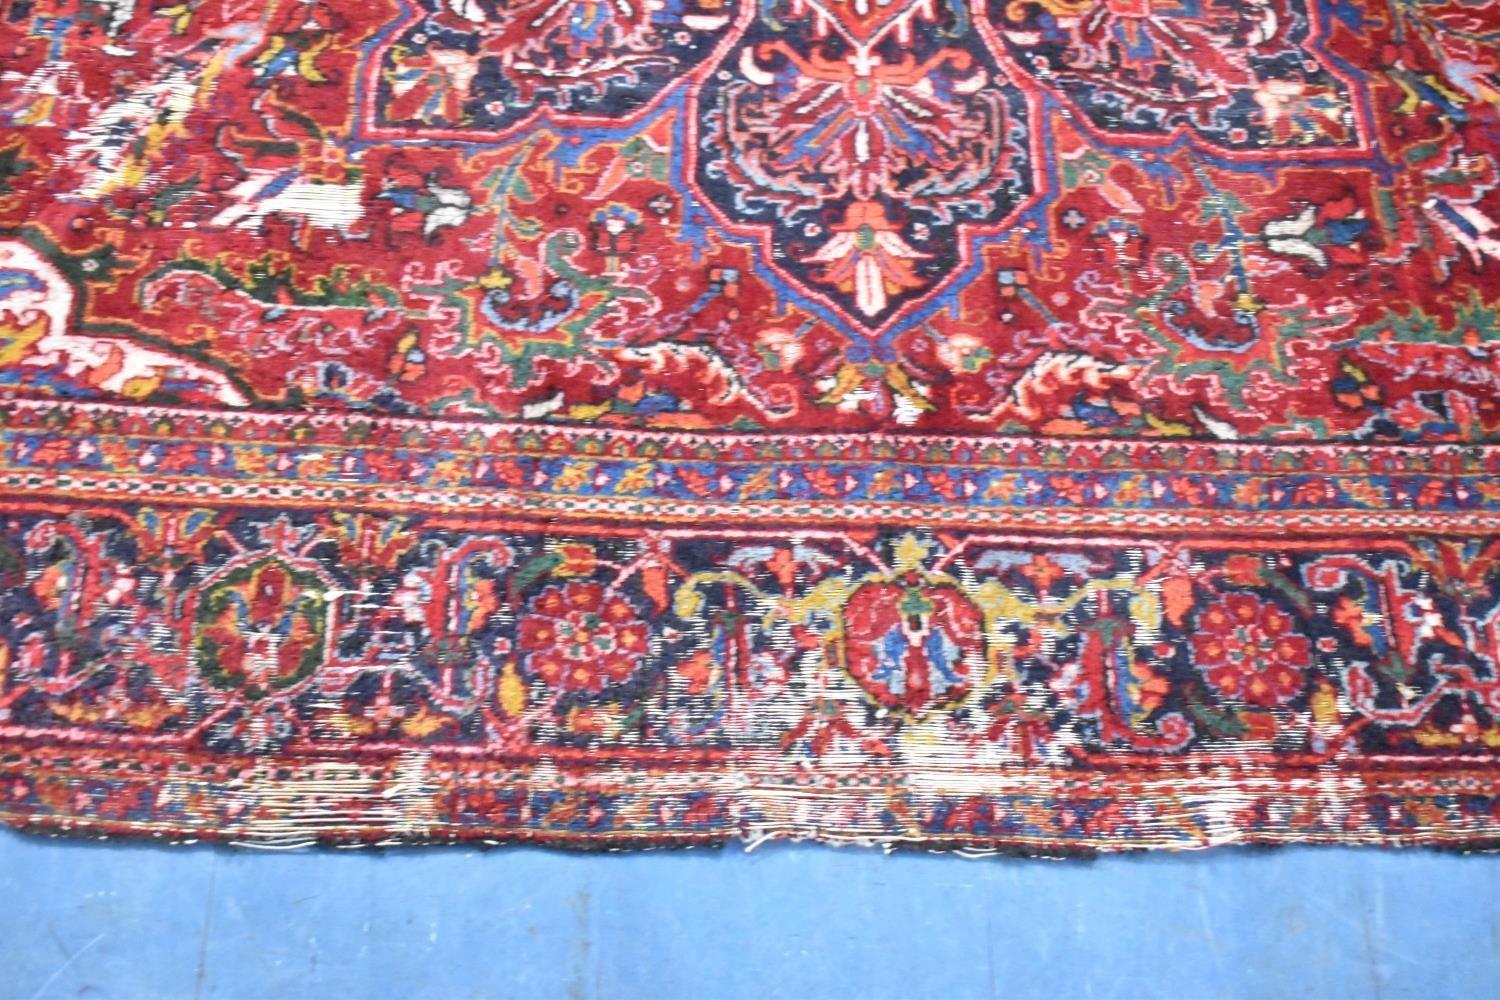 A Large Antique Persian Heriz Rug on Red Ground, Some Wear and Condition Issues, 340x240cms - Bild 4 aus 6